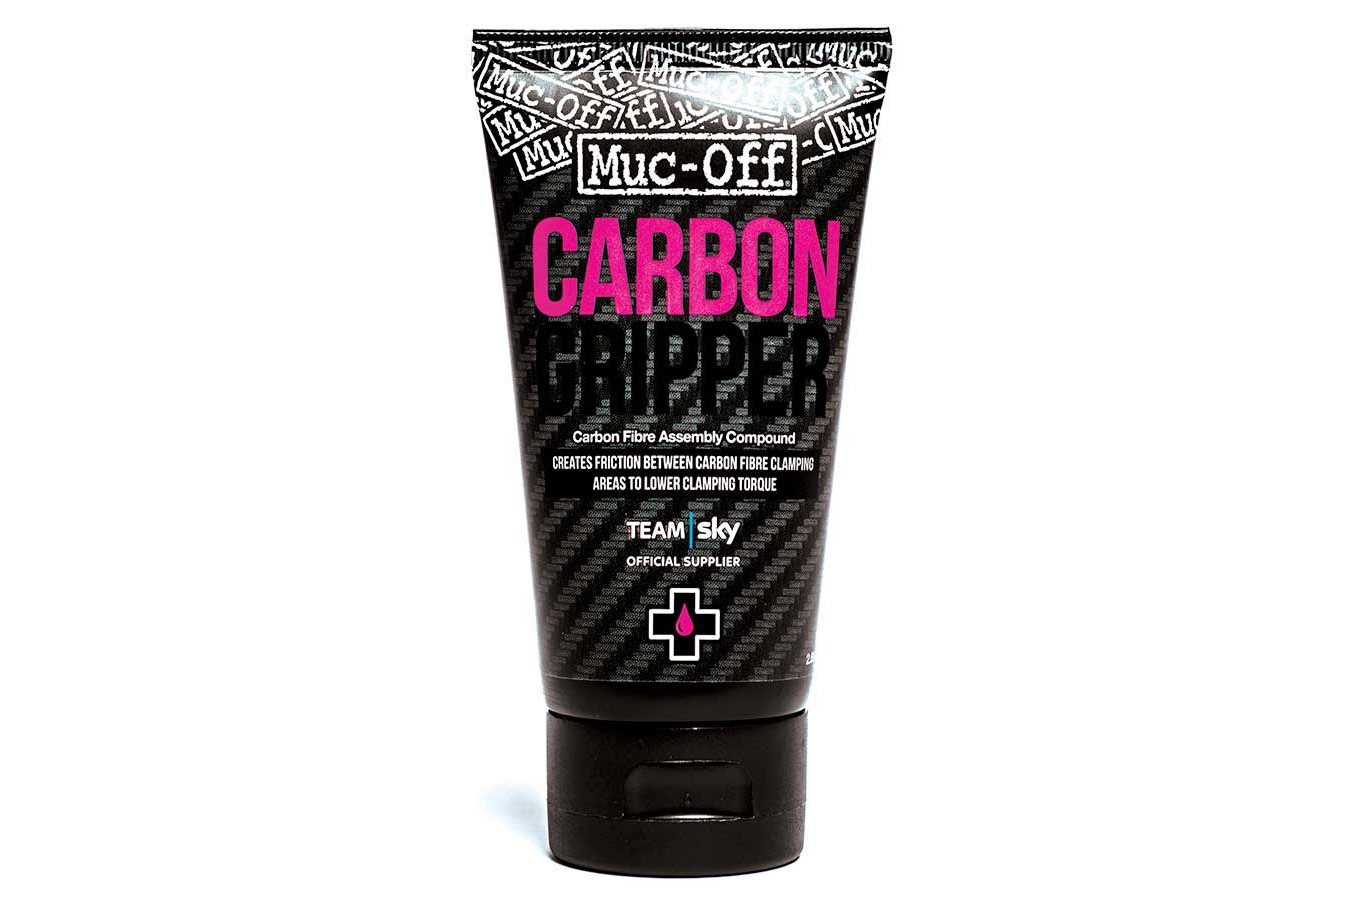 Muc-Off Carbon Gripper Assembly Compound 75g